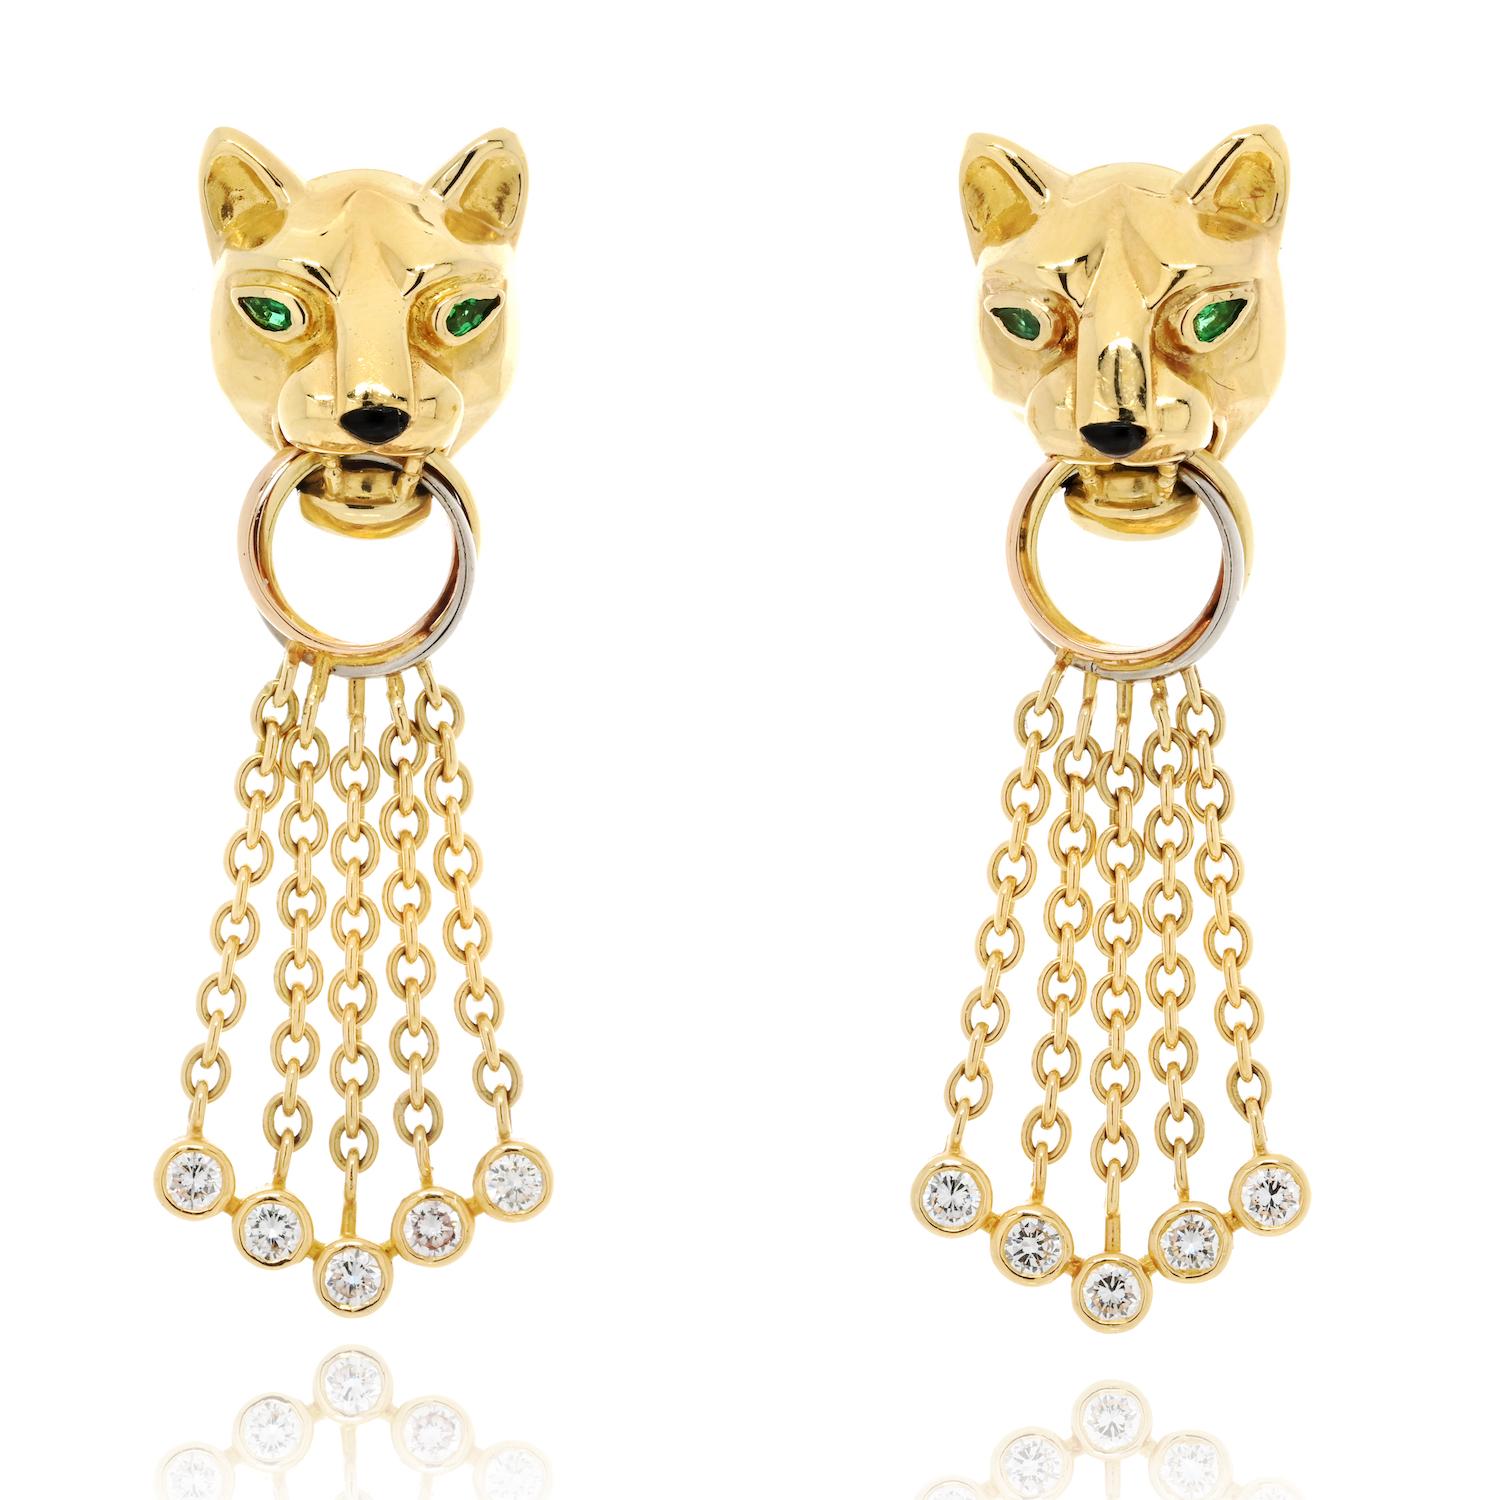 Modern Cartier 18K Yellow Gold Diamond, Emerald, Onyx and Bead ‘Panthère’ Earrings For Sale